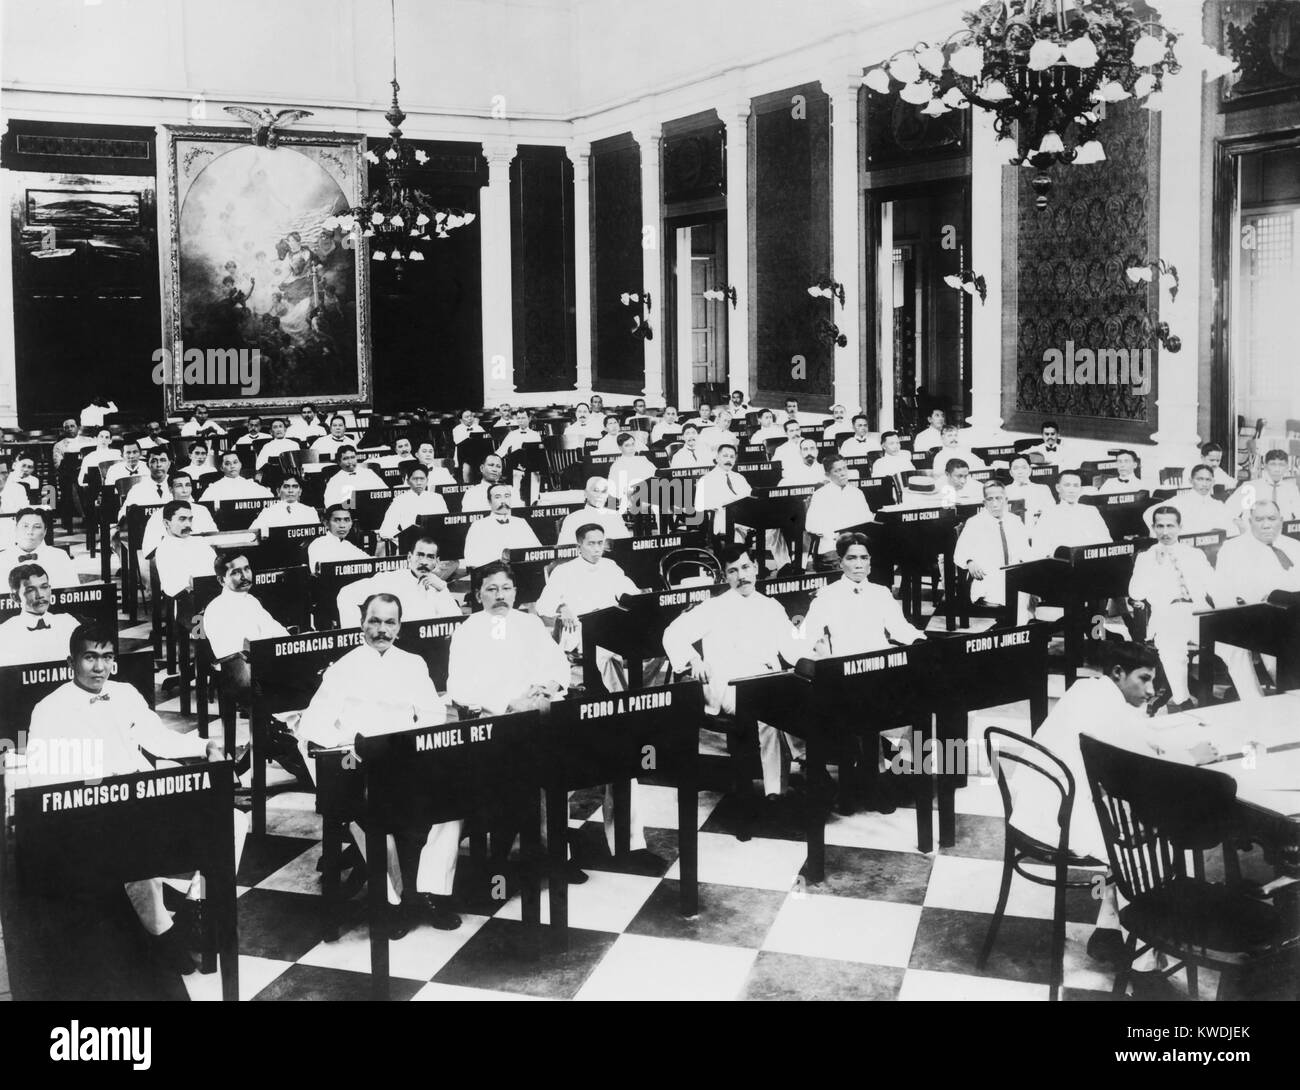 The popularly elected Philippines Assembly in its first session from 1908 to 1911. In 1916 the Philippine Senate replaced the US appointed Philippine Commission in a move toward greater Philippine autonomy (BSLOC 2017 10 90) Stock Photo